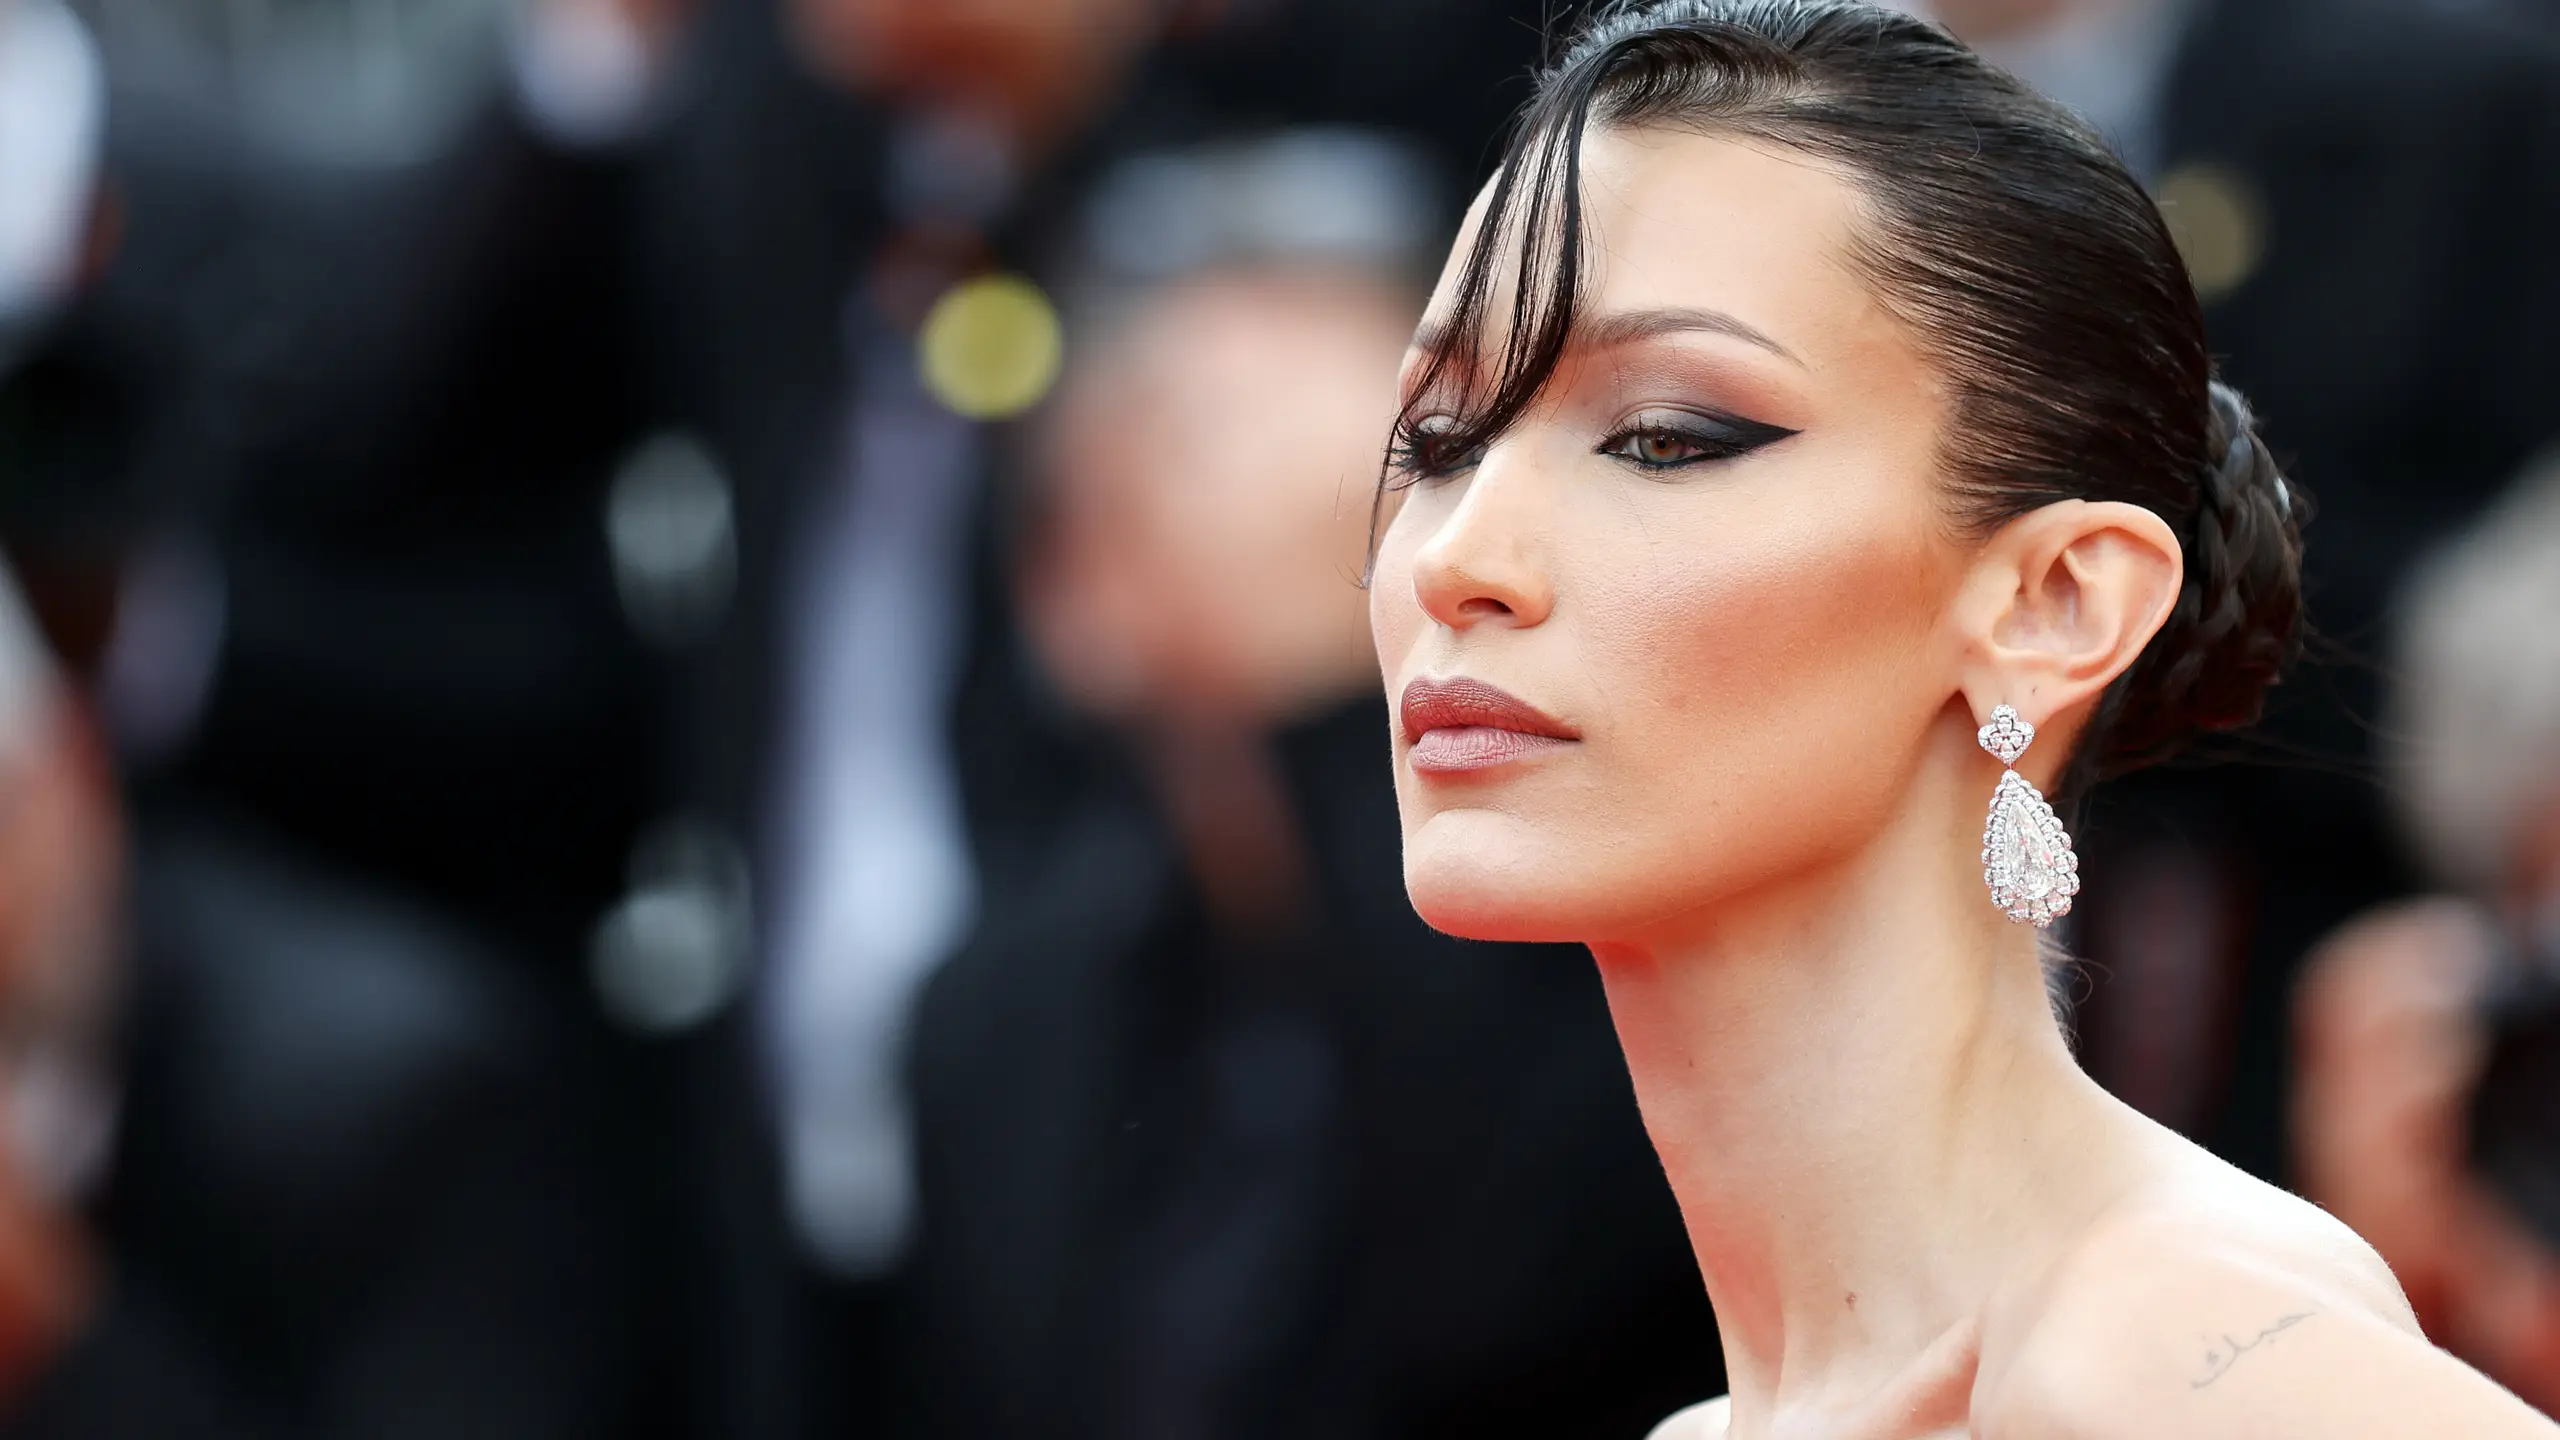 Bella Hadid am roten Teppich in Cannes 2022.